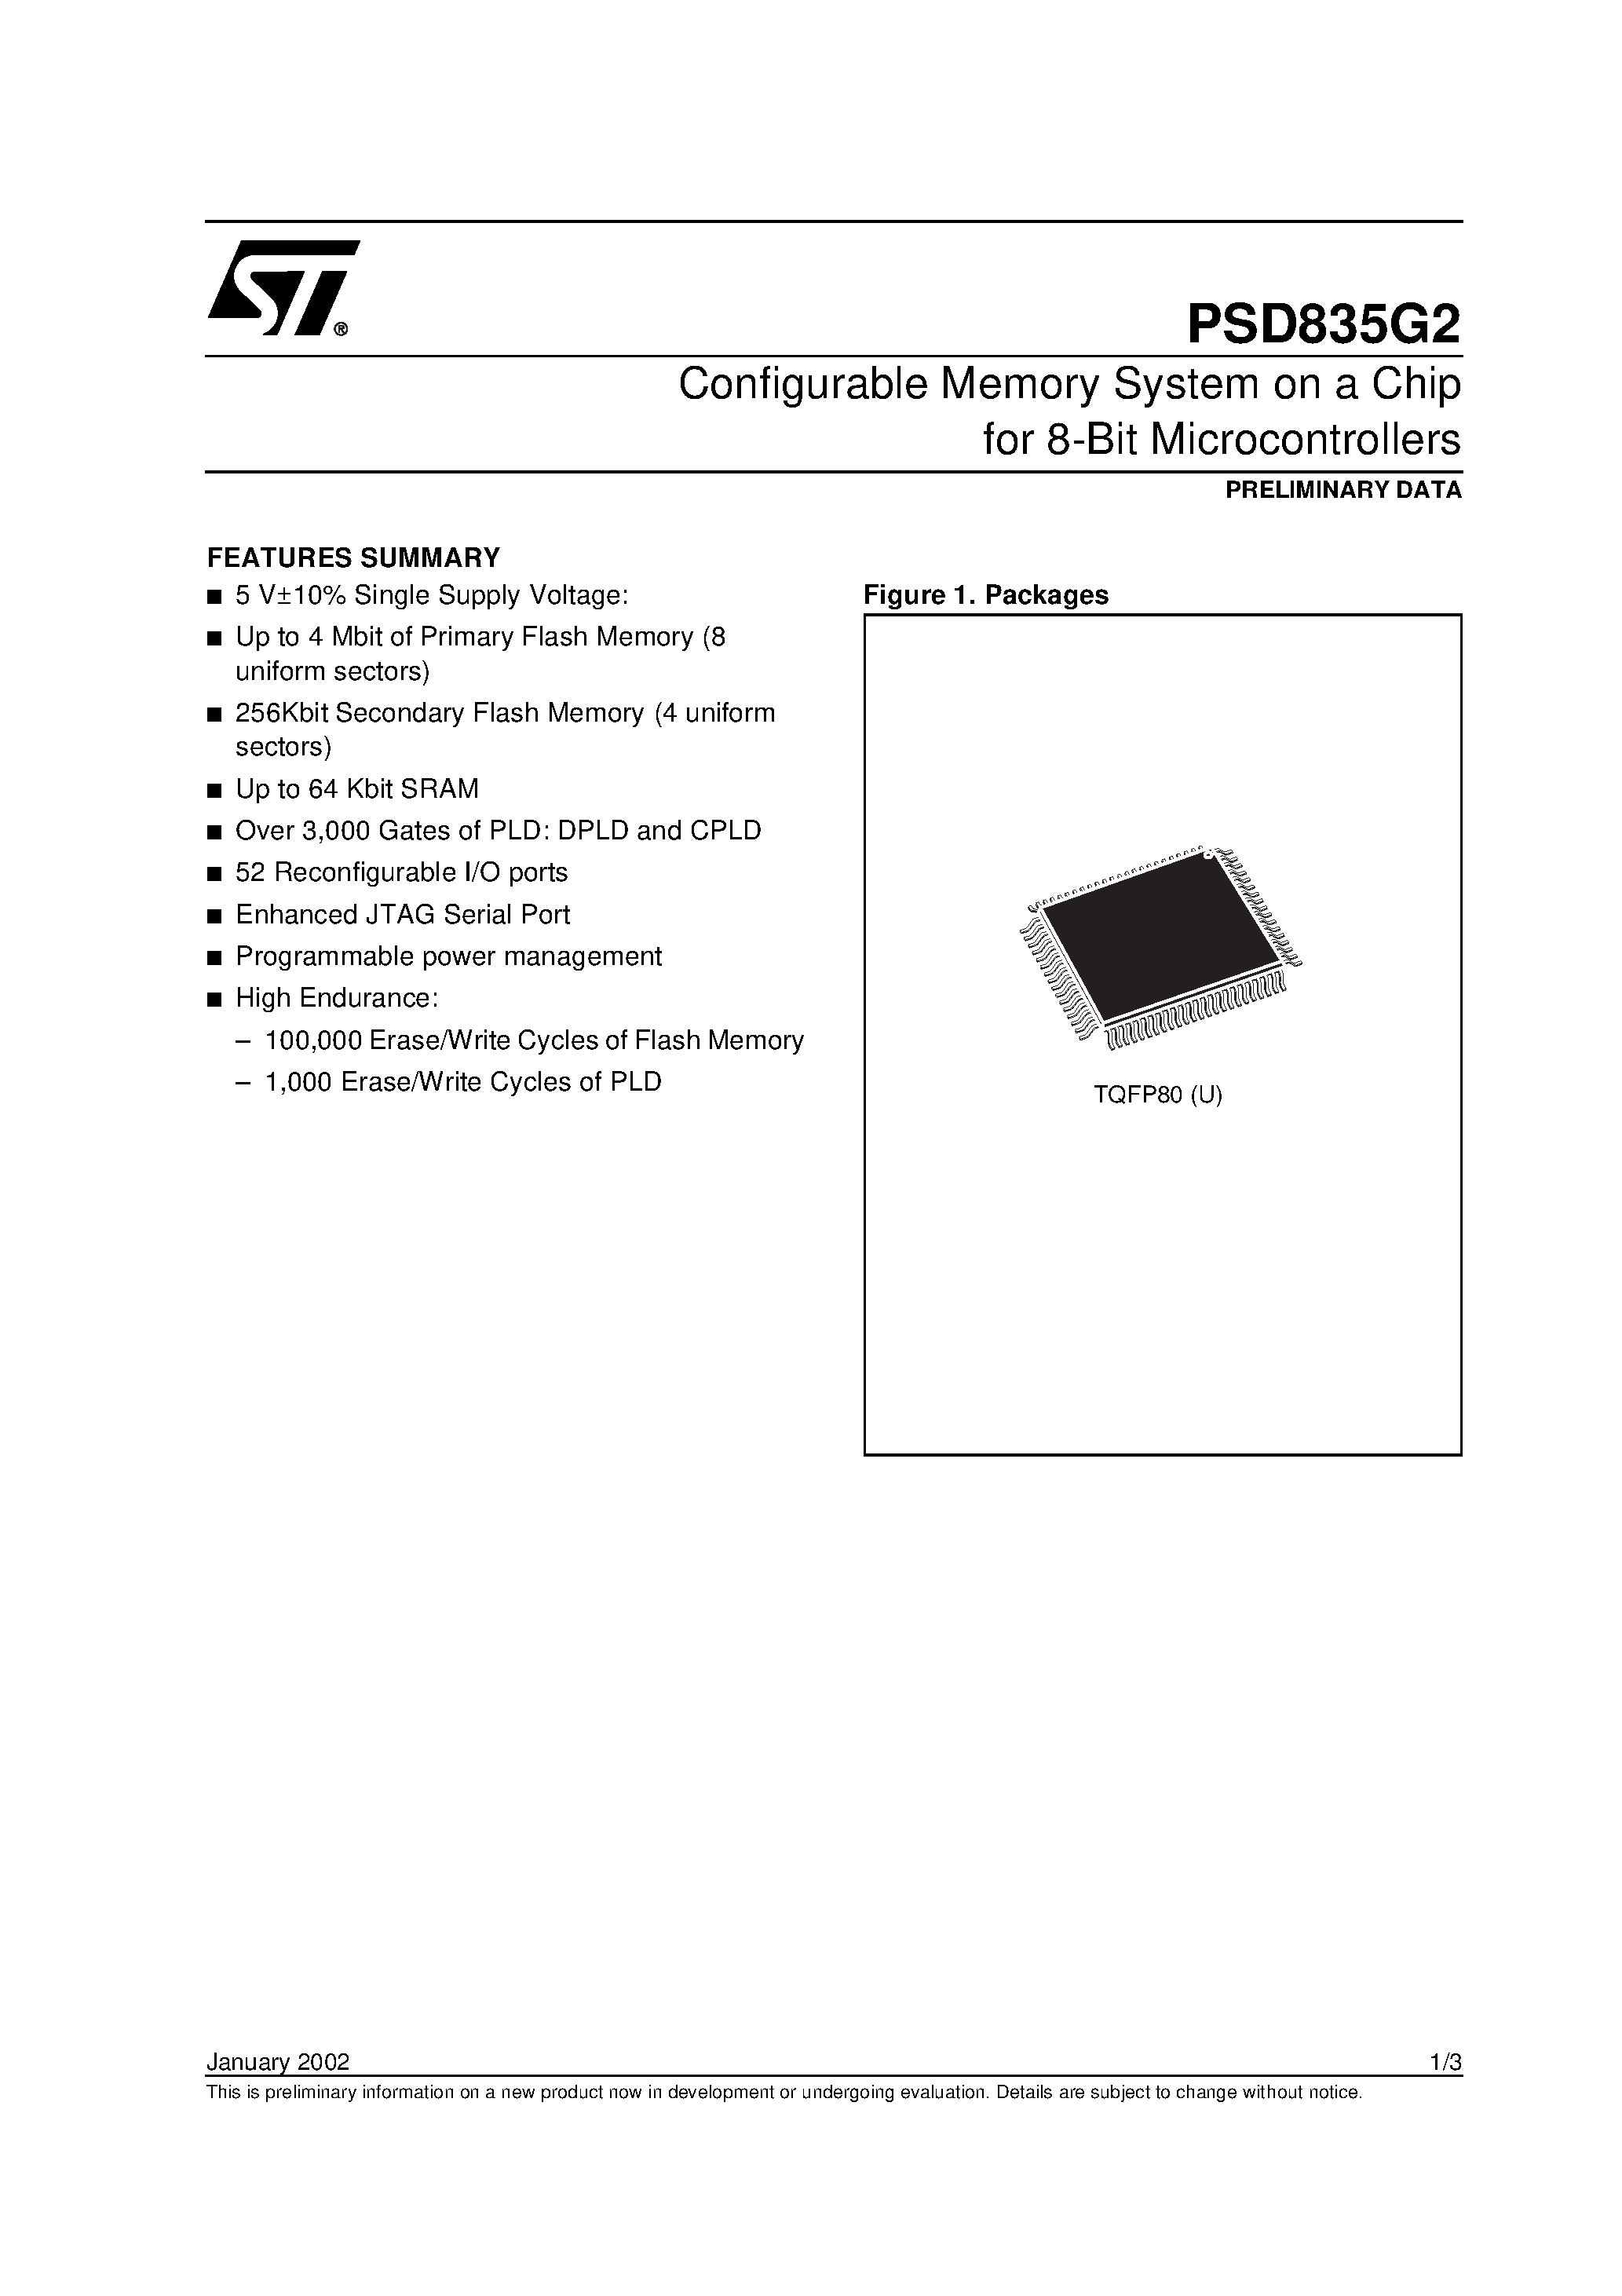 Datasheet PSD835F1V-A-70JI - Configurable Memory System on a Chip for 8-Bit Microcontrollers page 1